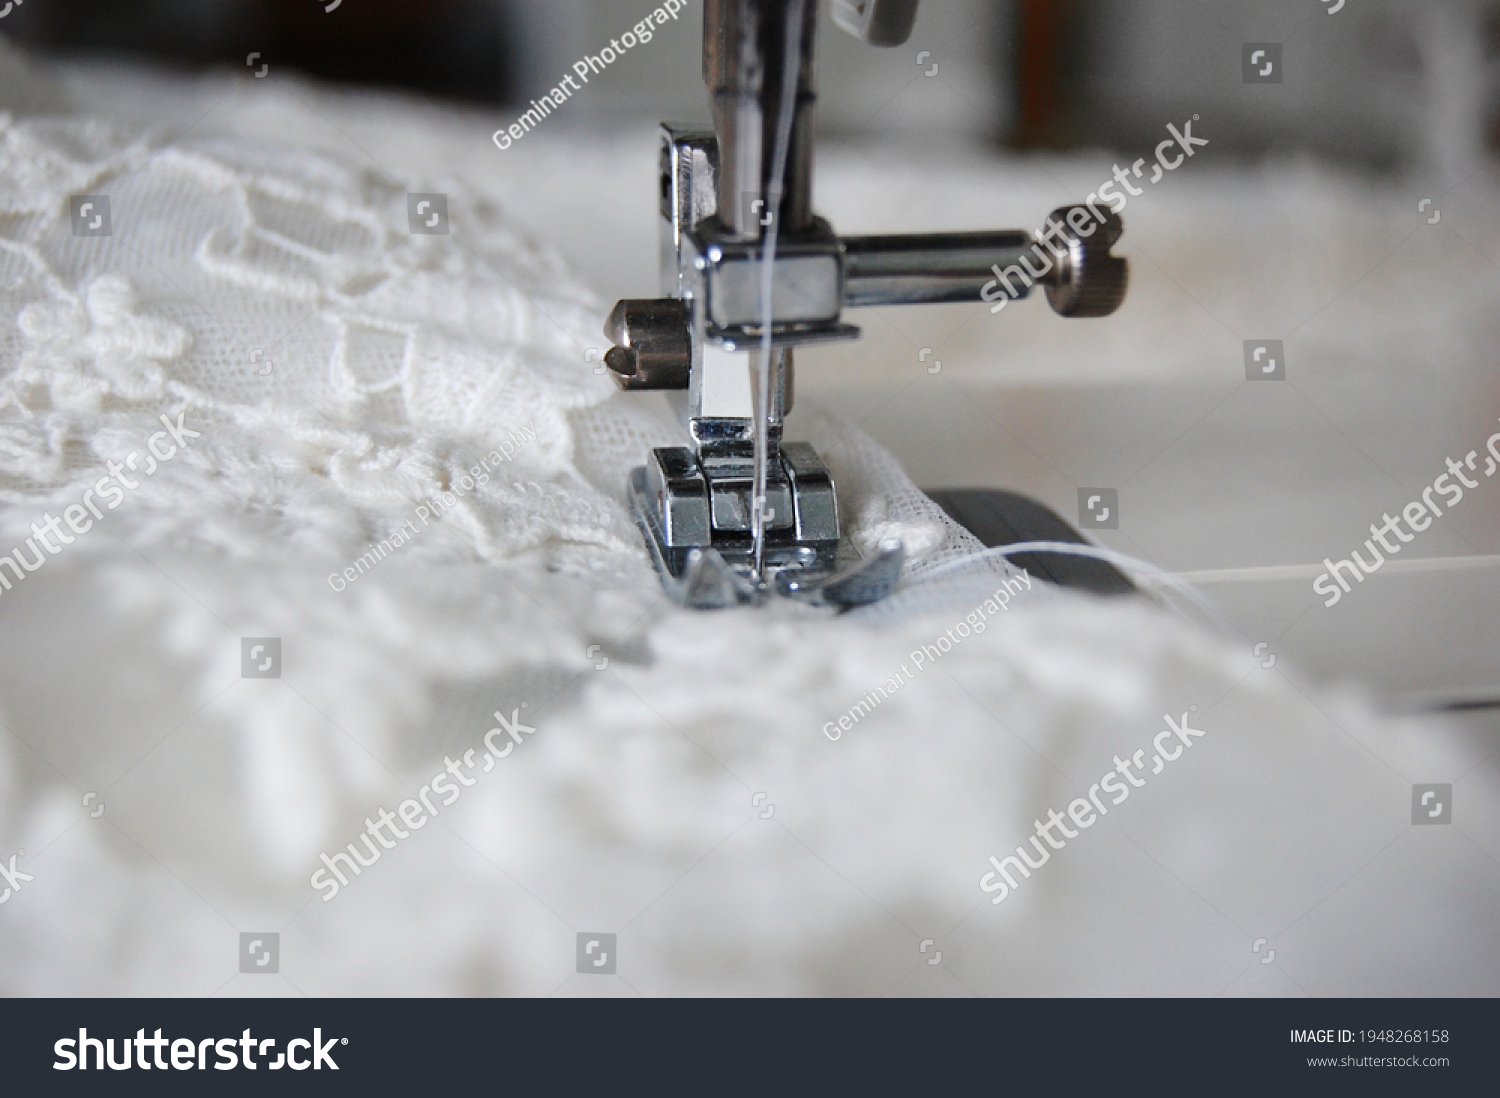 Close up of a sewing machine making alterations of a bride's wedding dress. #1948268158